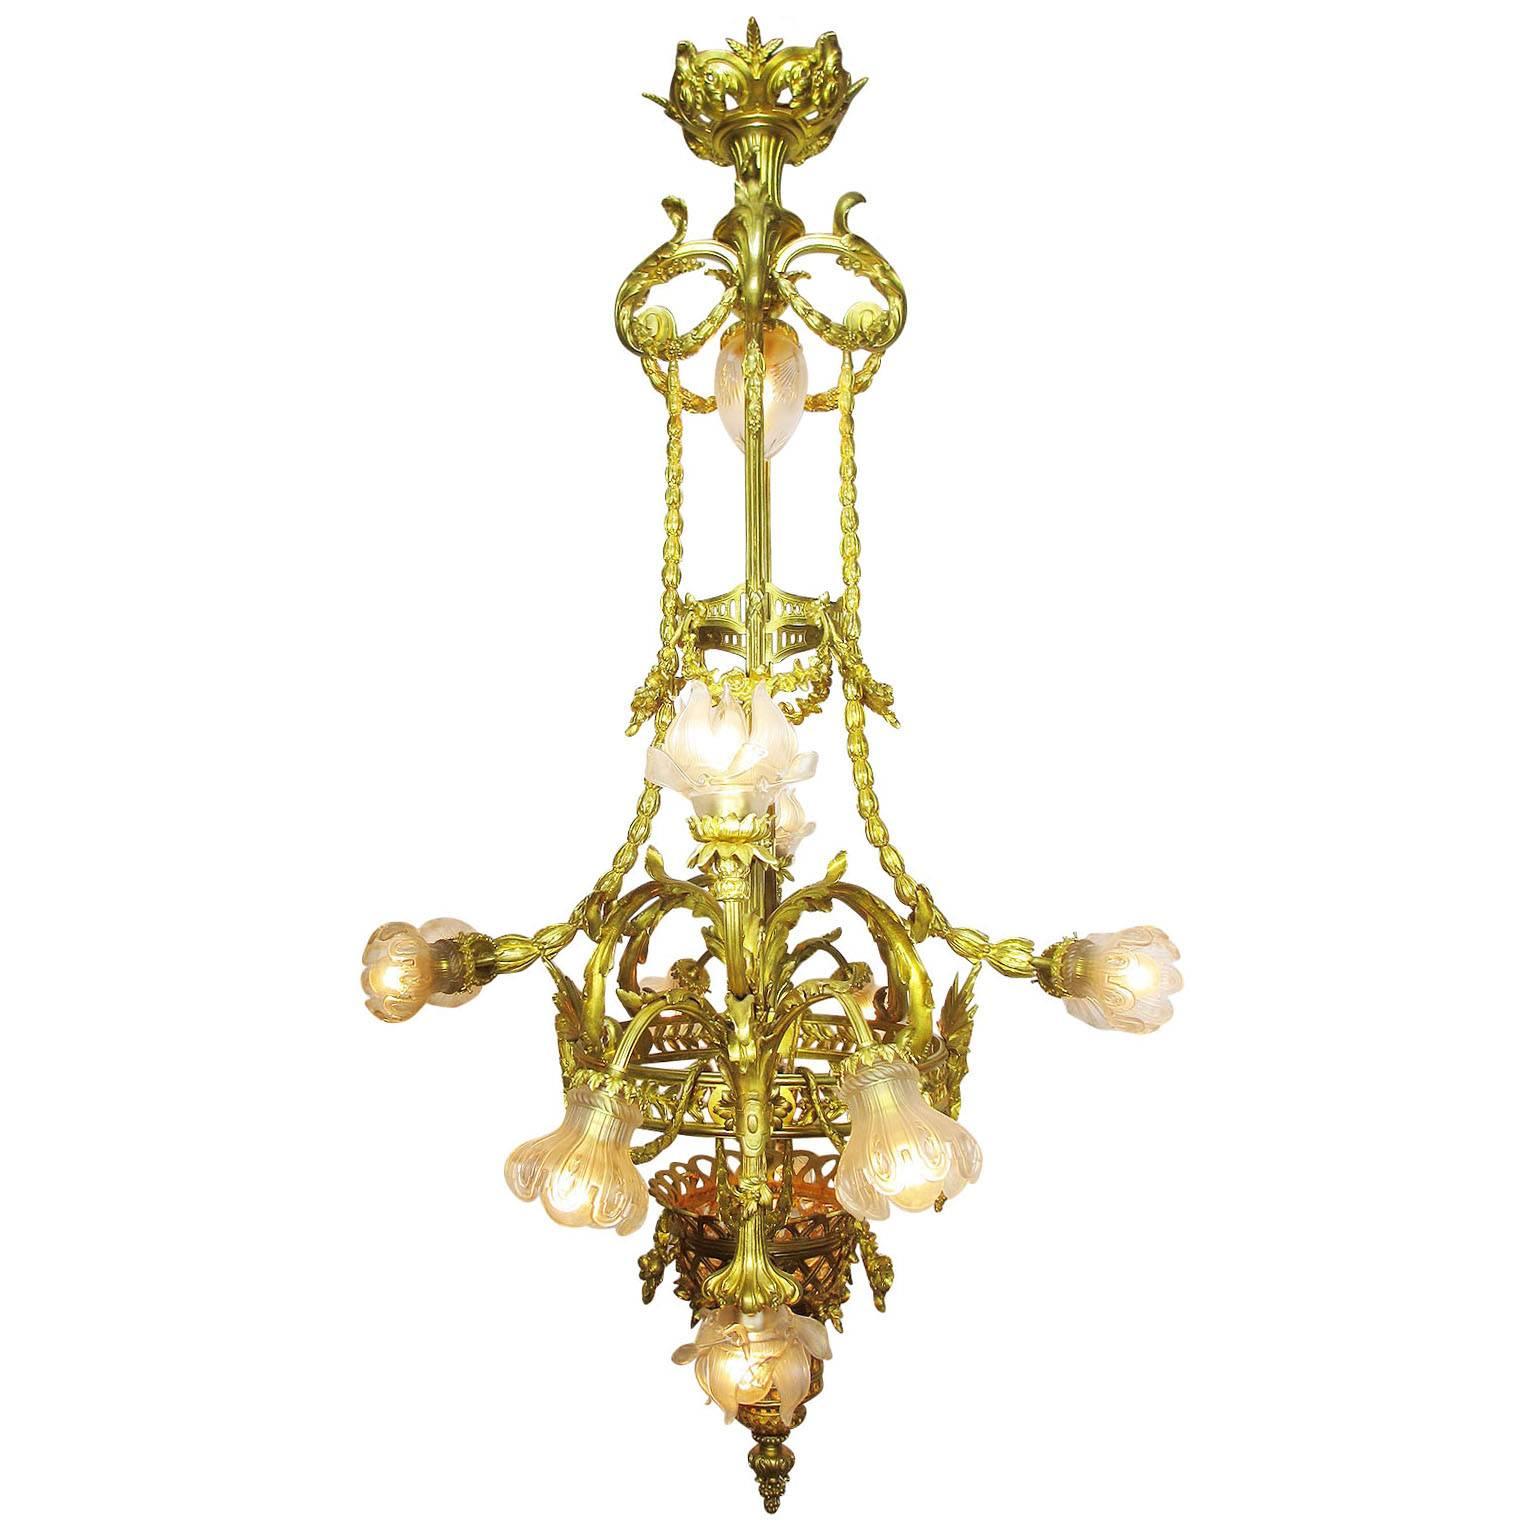 Palatial French 19th/20th Century Louis XIV Style Gilt-Bronze Orante Chandelier  For Sale 2